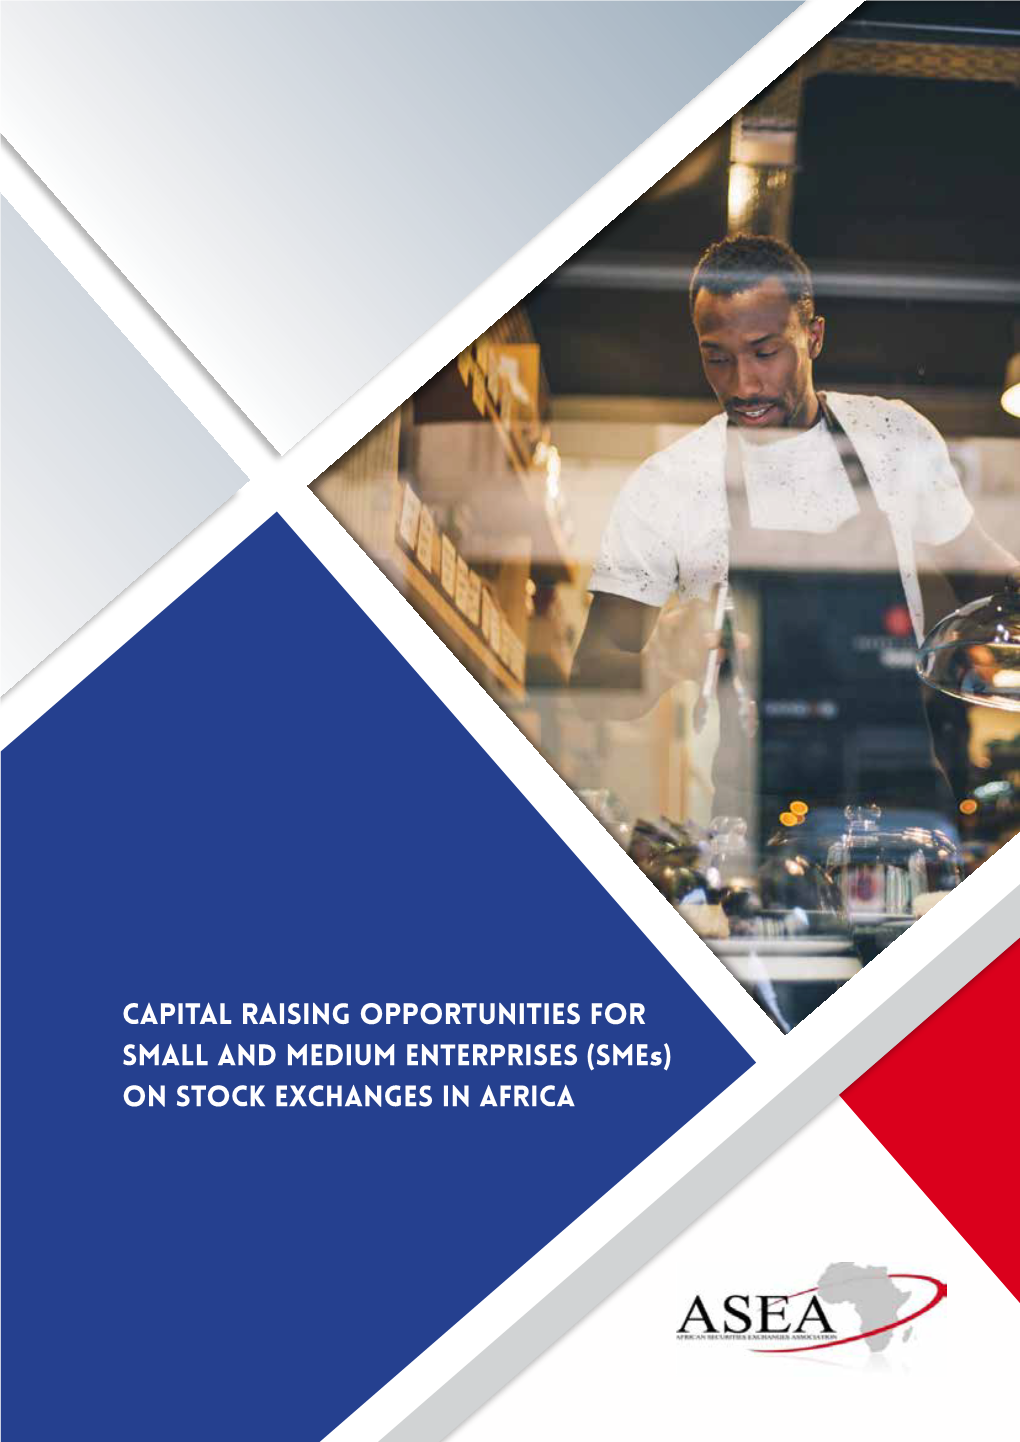 CAPITAL RAISING OPPORTUNITIES for SMALL and MEDIUM ENTERPRISES (Smes) on STOCK EXCHANGES in AFRICA